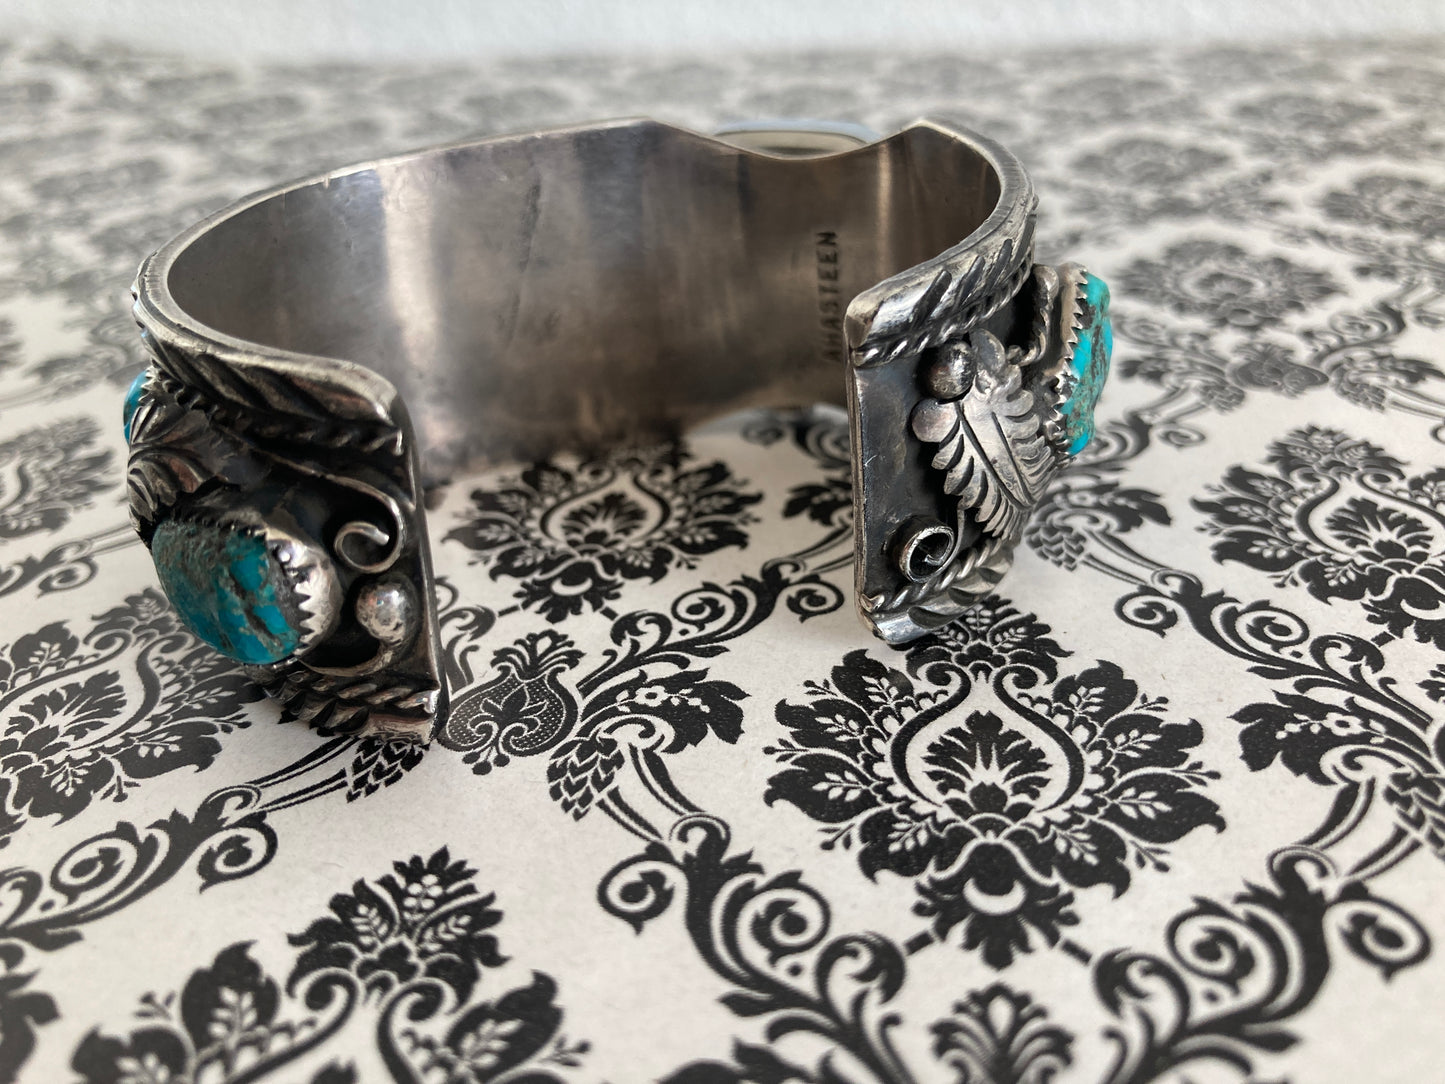 Navajo Silver and Turquoise Large Cuff Watch Marked Ahasteen